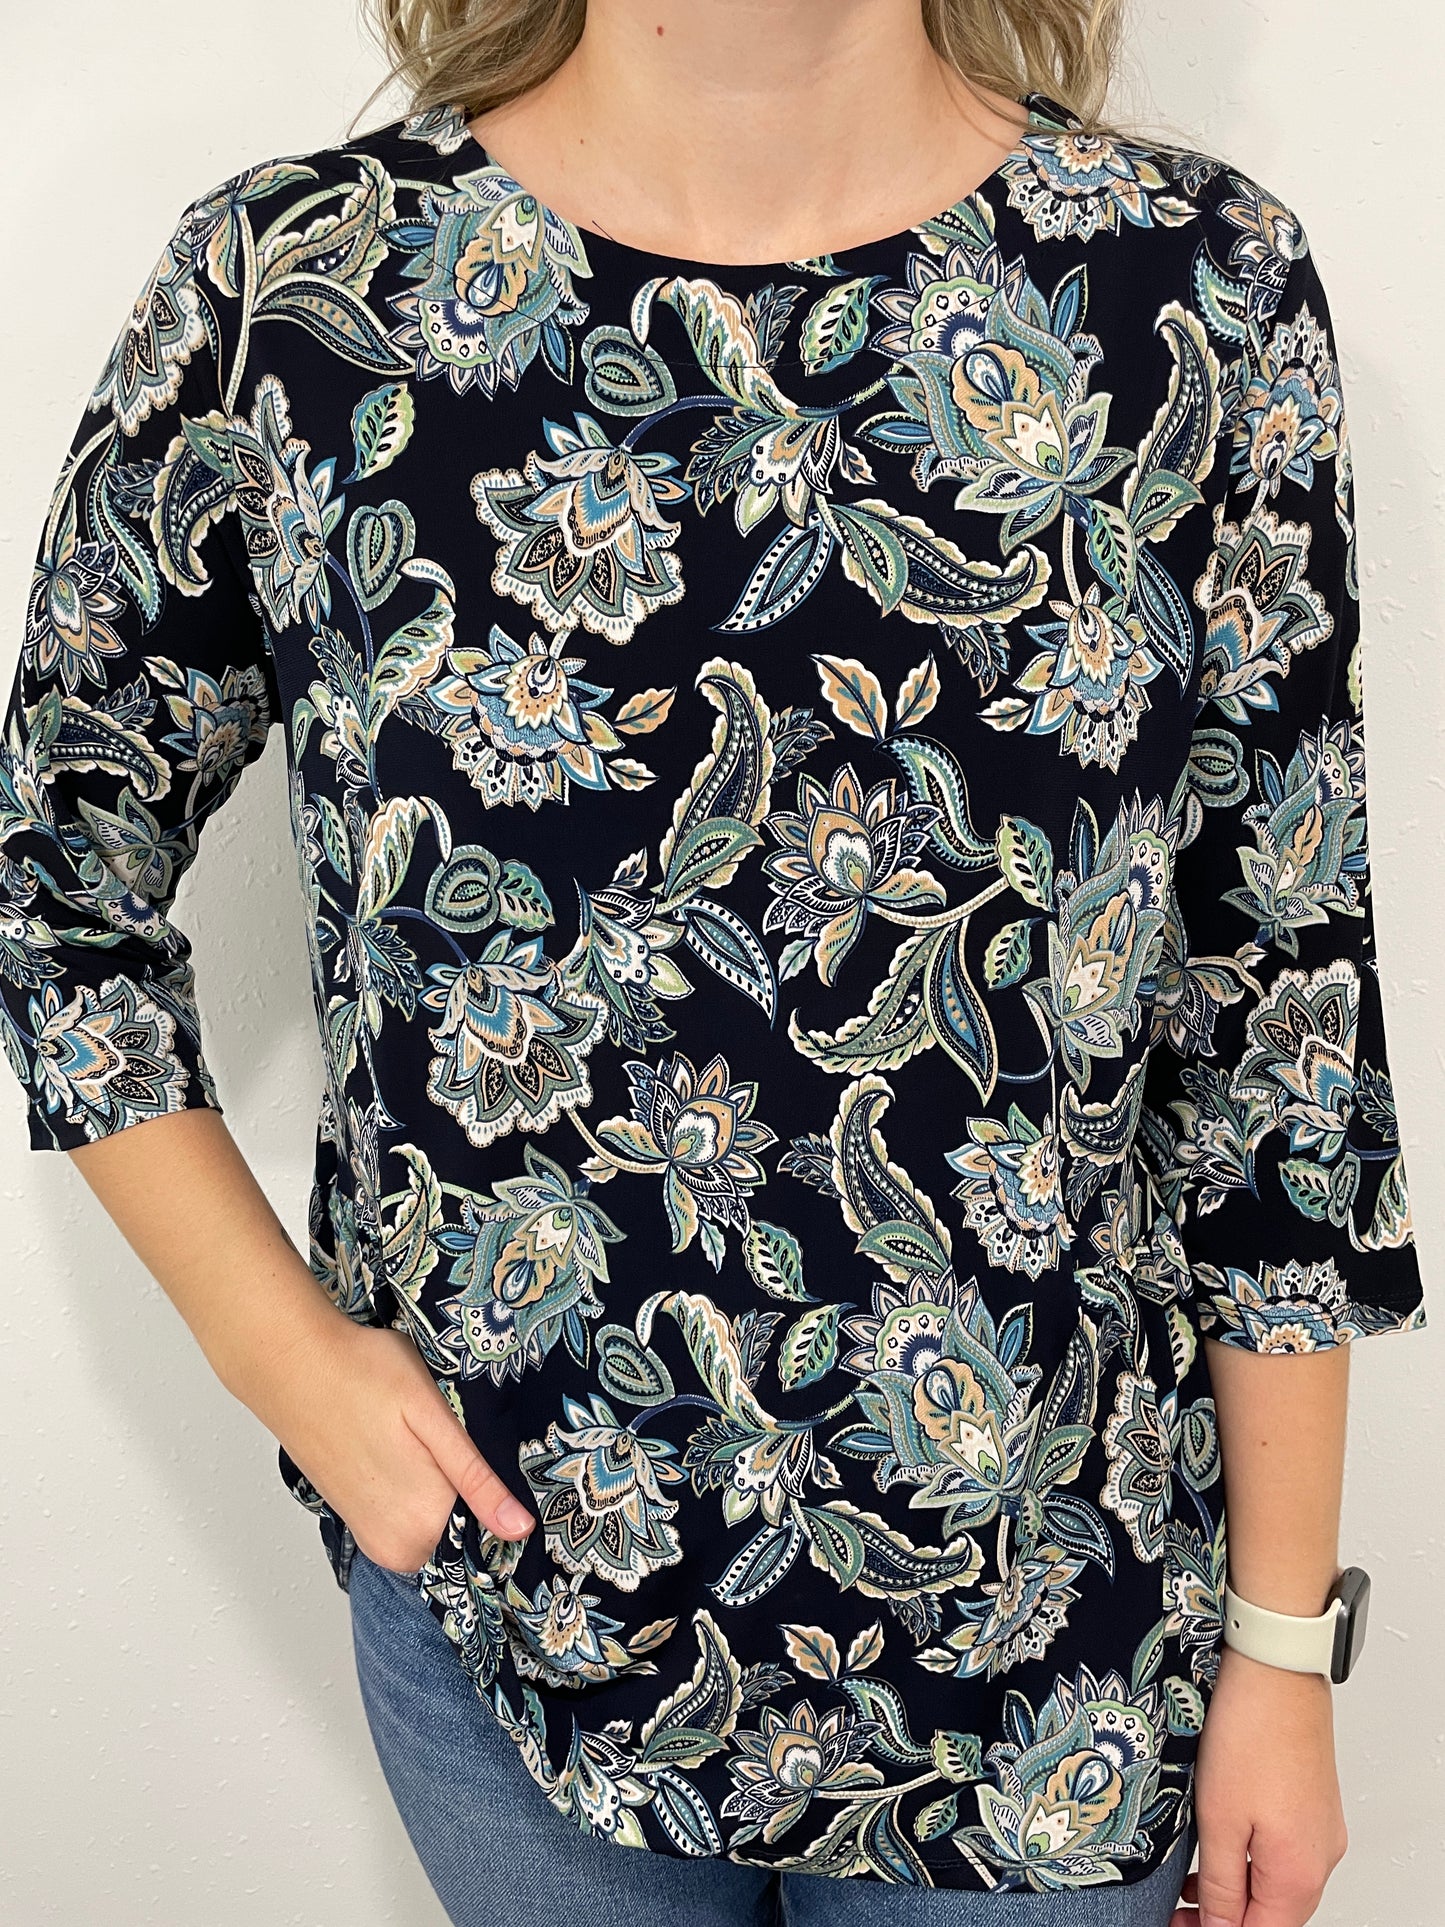 KEEP IT TOGETHER PAISLEY PRINT TOP - BLUE MULTI